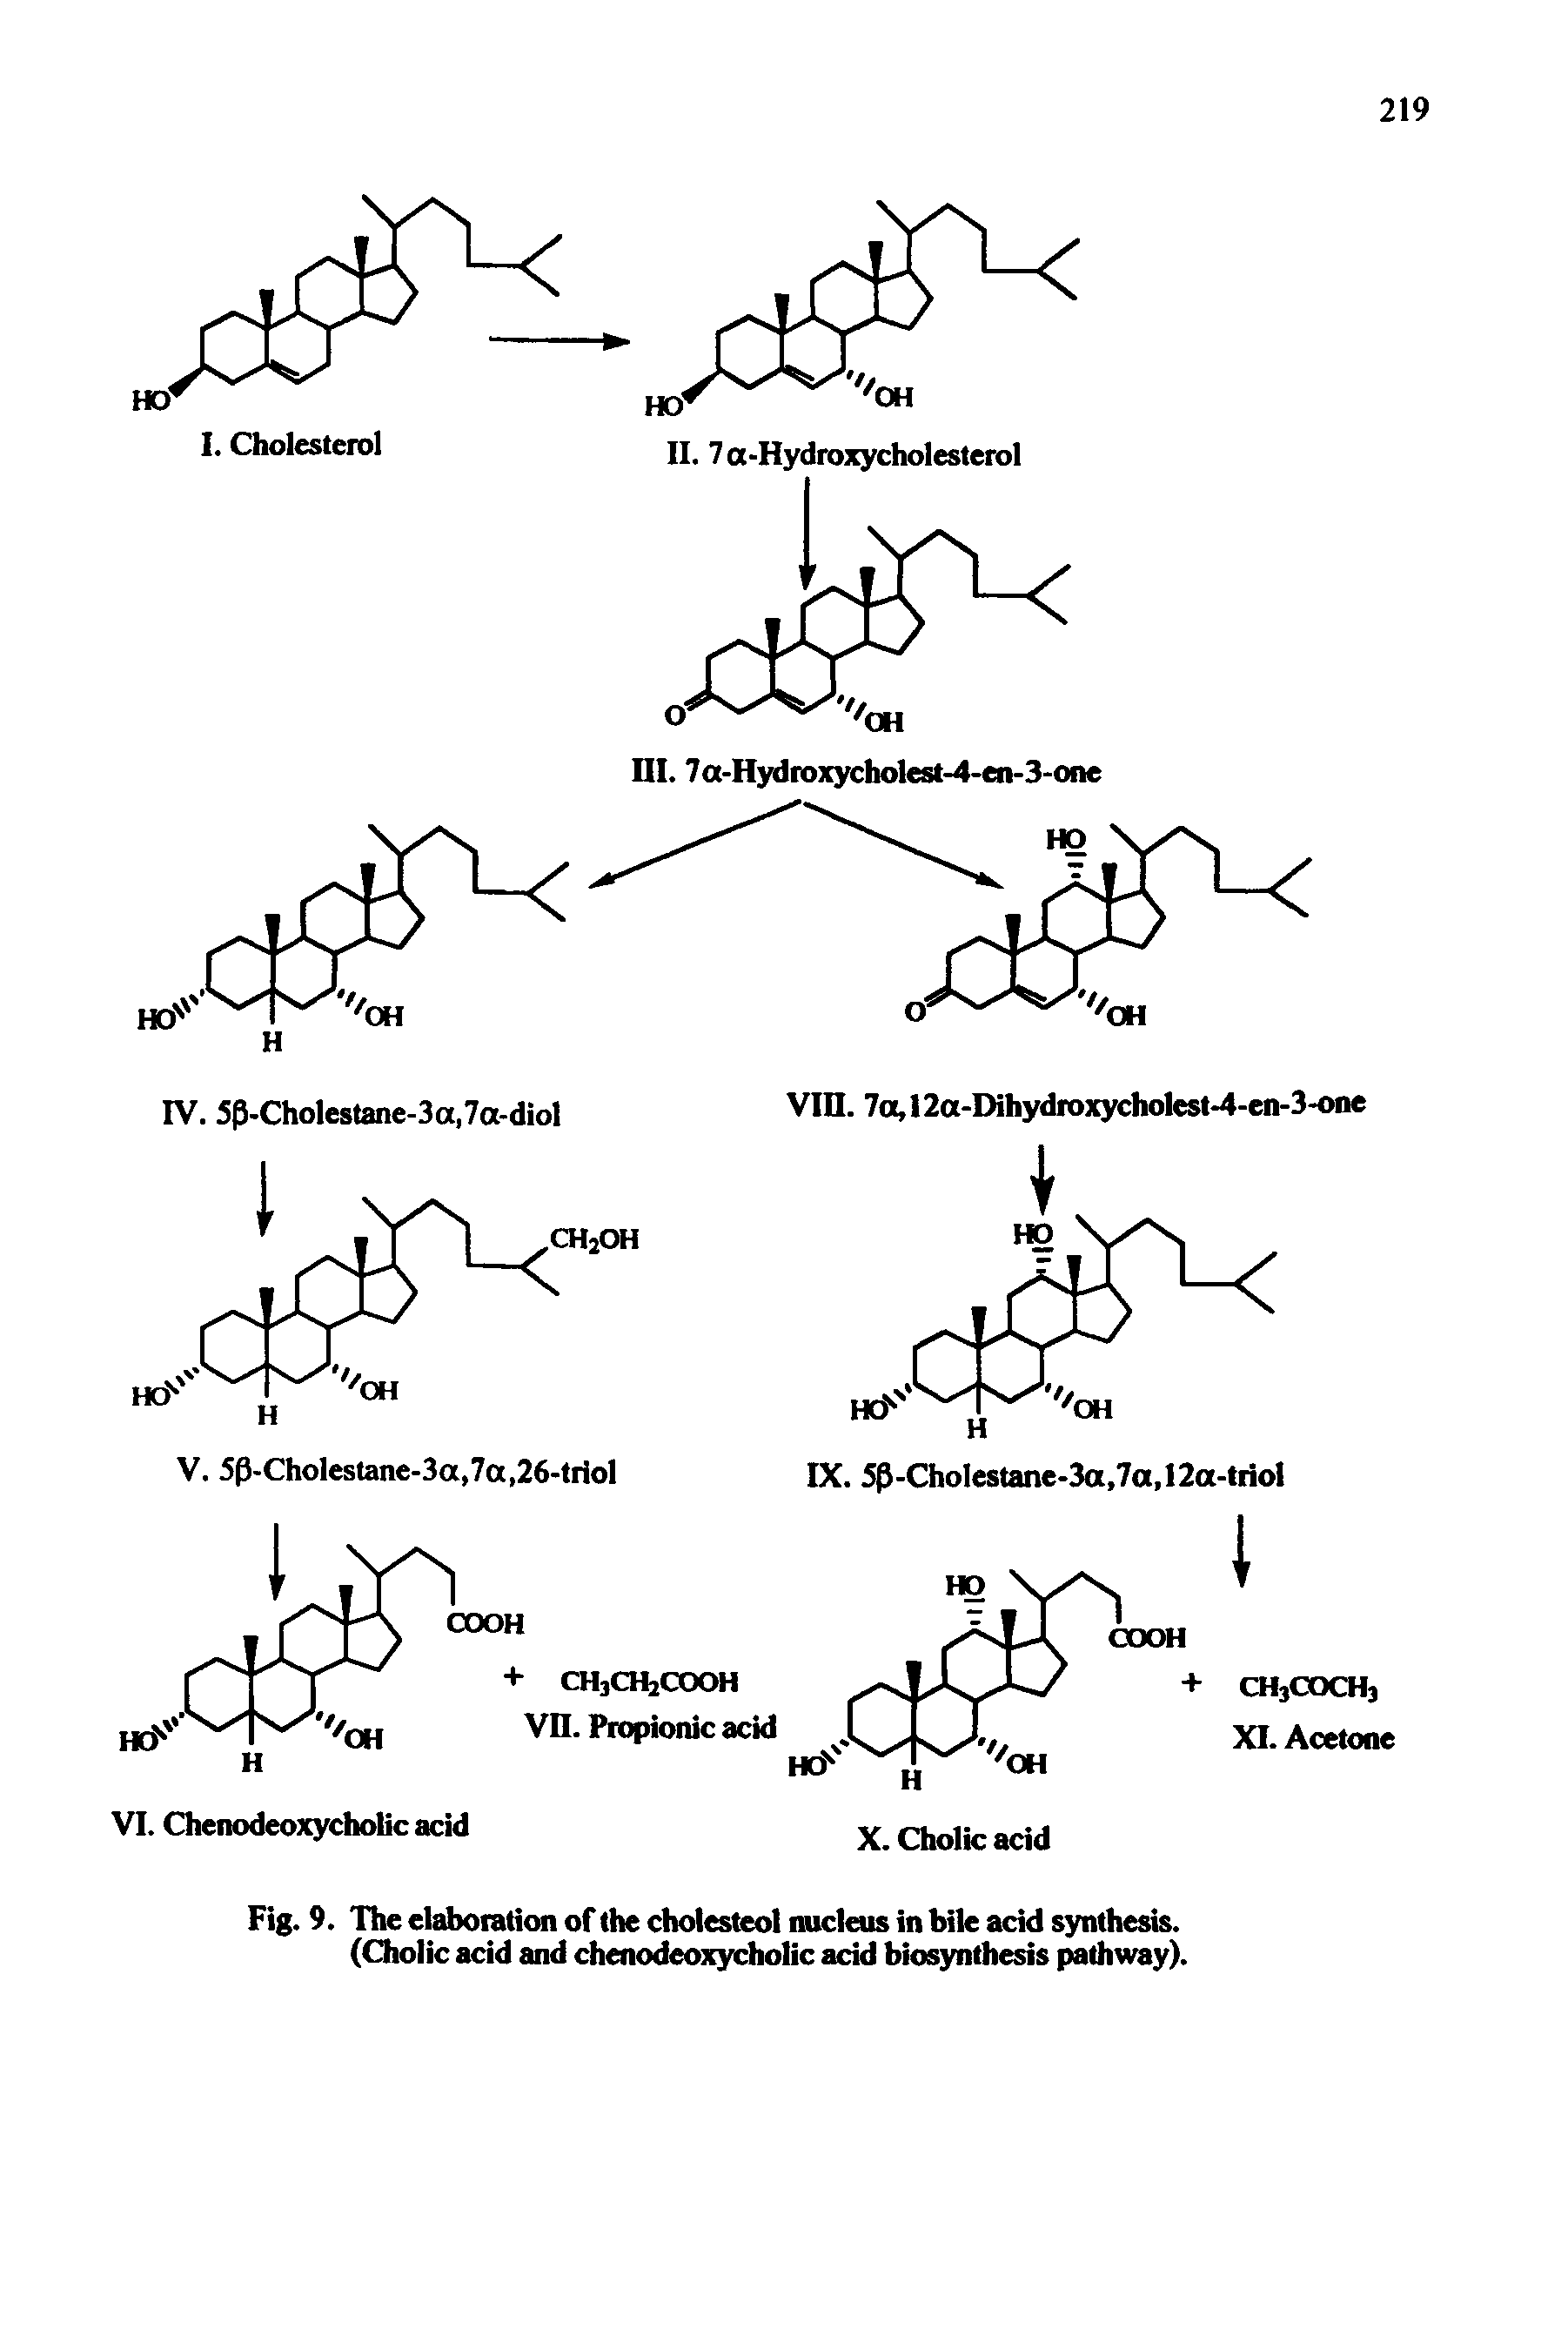 Fig. 9. The elaboration of the cholesteol nucleus in bile acid synthesis. (Cholic acid and chenodeoxycholic acid biosynthesis pathway).